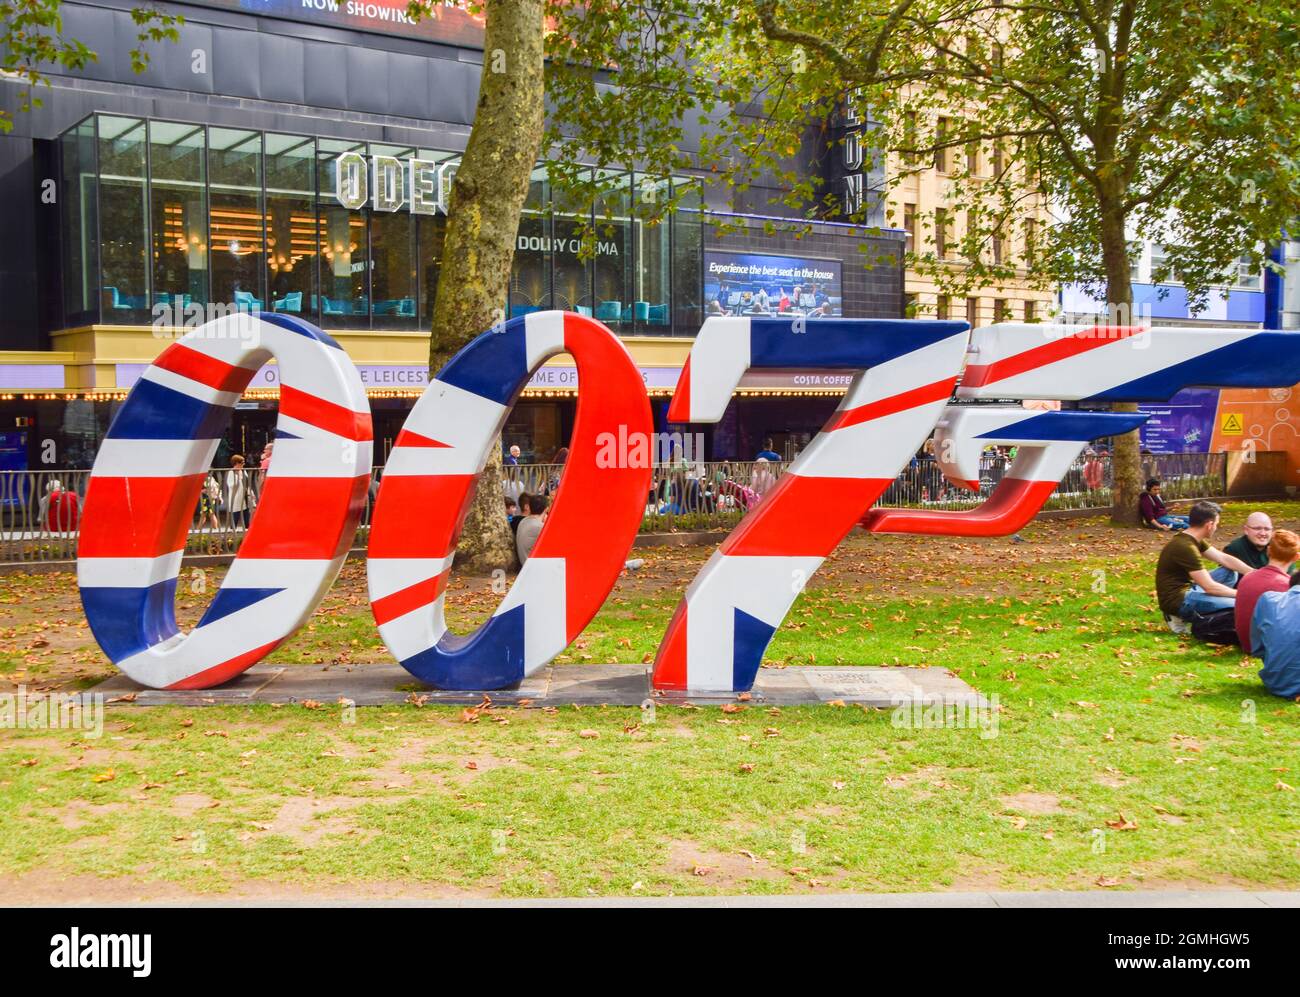 London, United Kingdom. 18th September 2021. The famous 007 logo was unveiled in Leicester Square ahead of the release of the latest James Bond movie, No Time To Die, which opens in the UK on 30 September 2021. Stock Photo